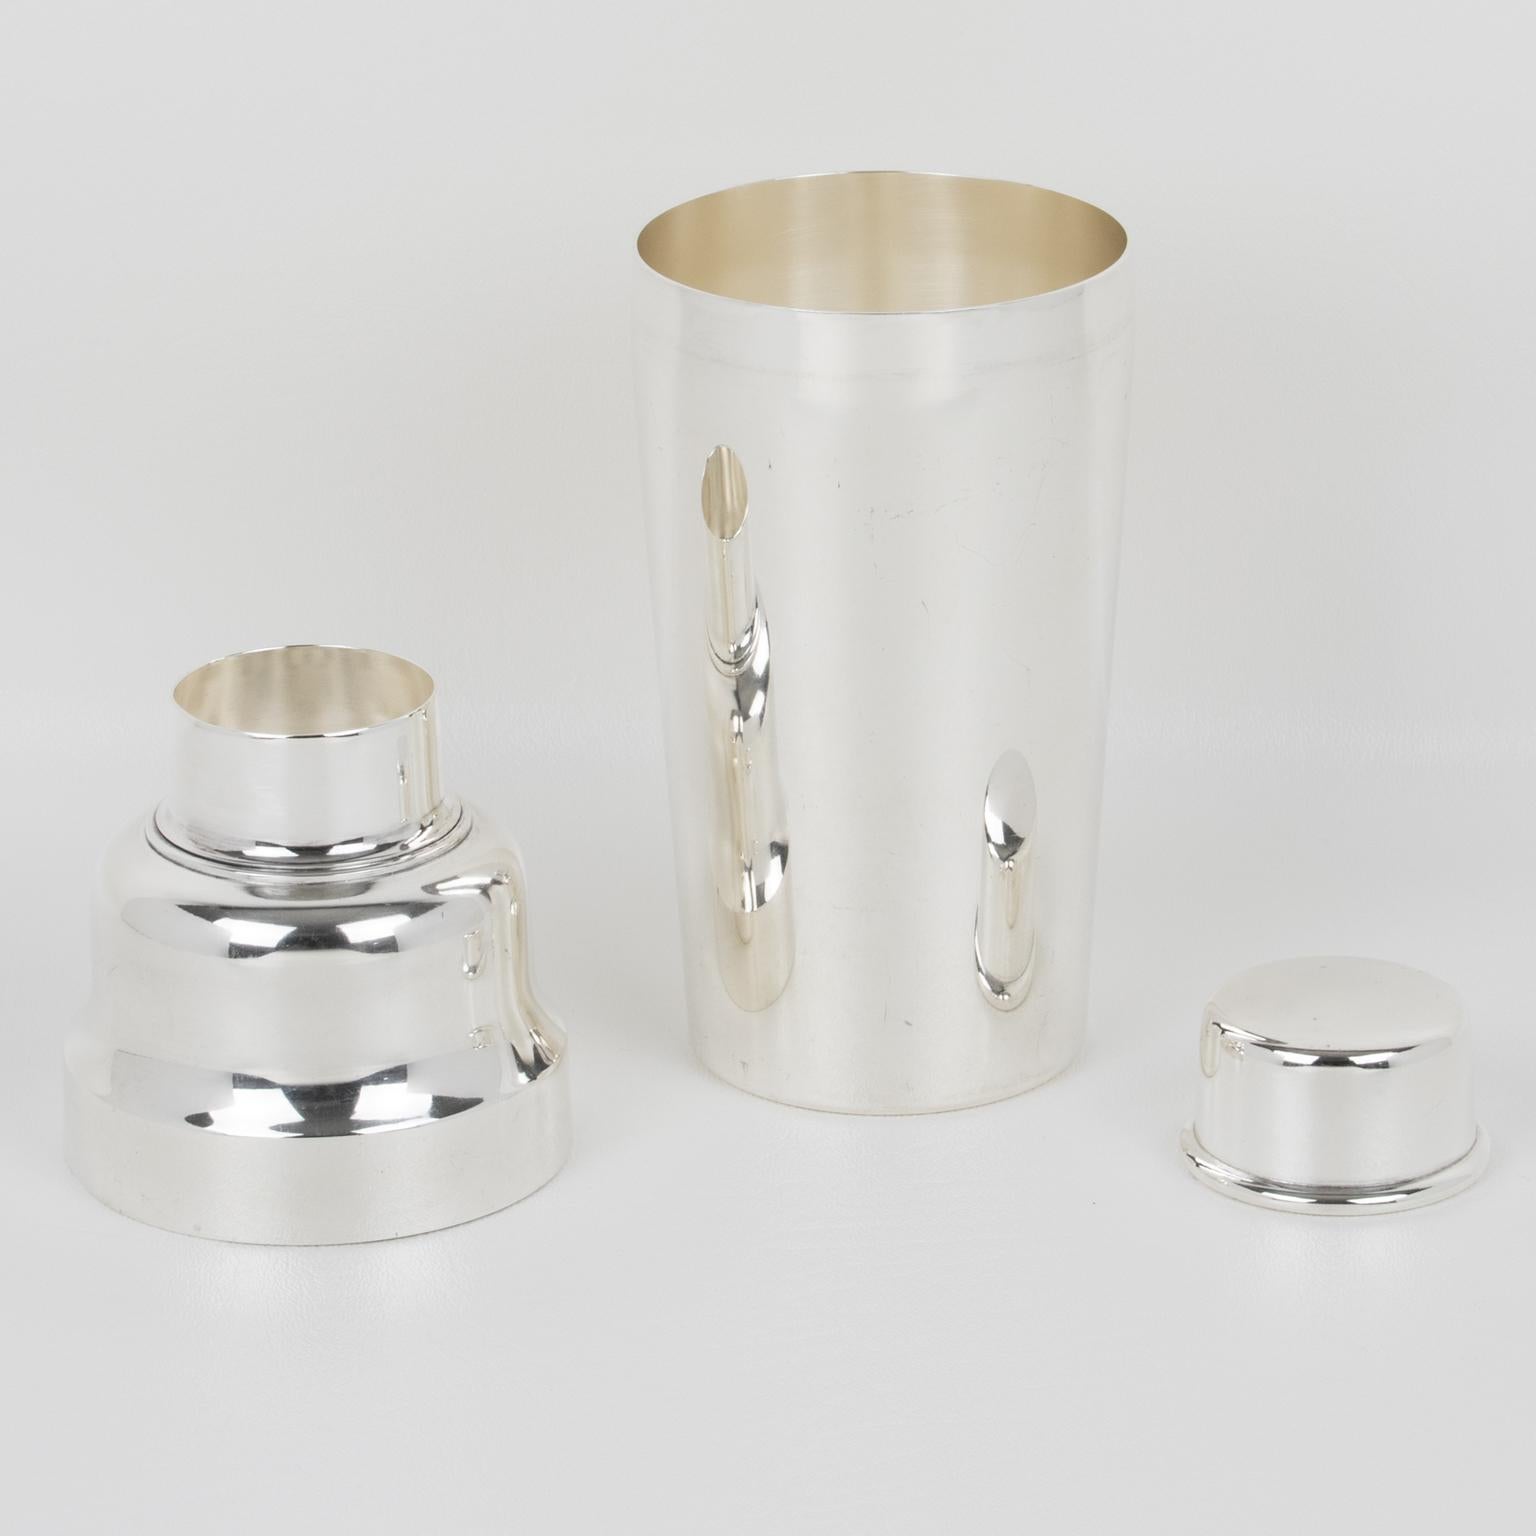 An elegant French Mid-Century, 1950s silver plate cylindrical cocktail or Martini shaker designed by silversmith Christofle, Paris. The three-sectioned designed cocktail shaker has a removable cap and strainer. The lovely streamlined modernist